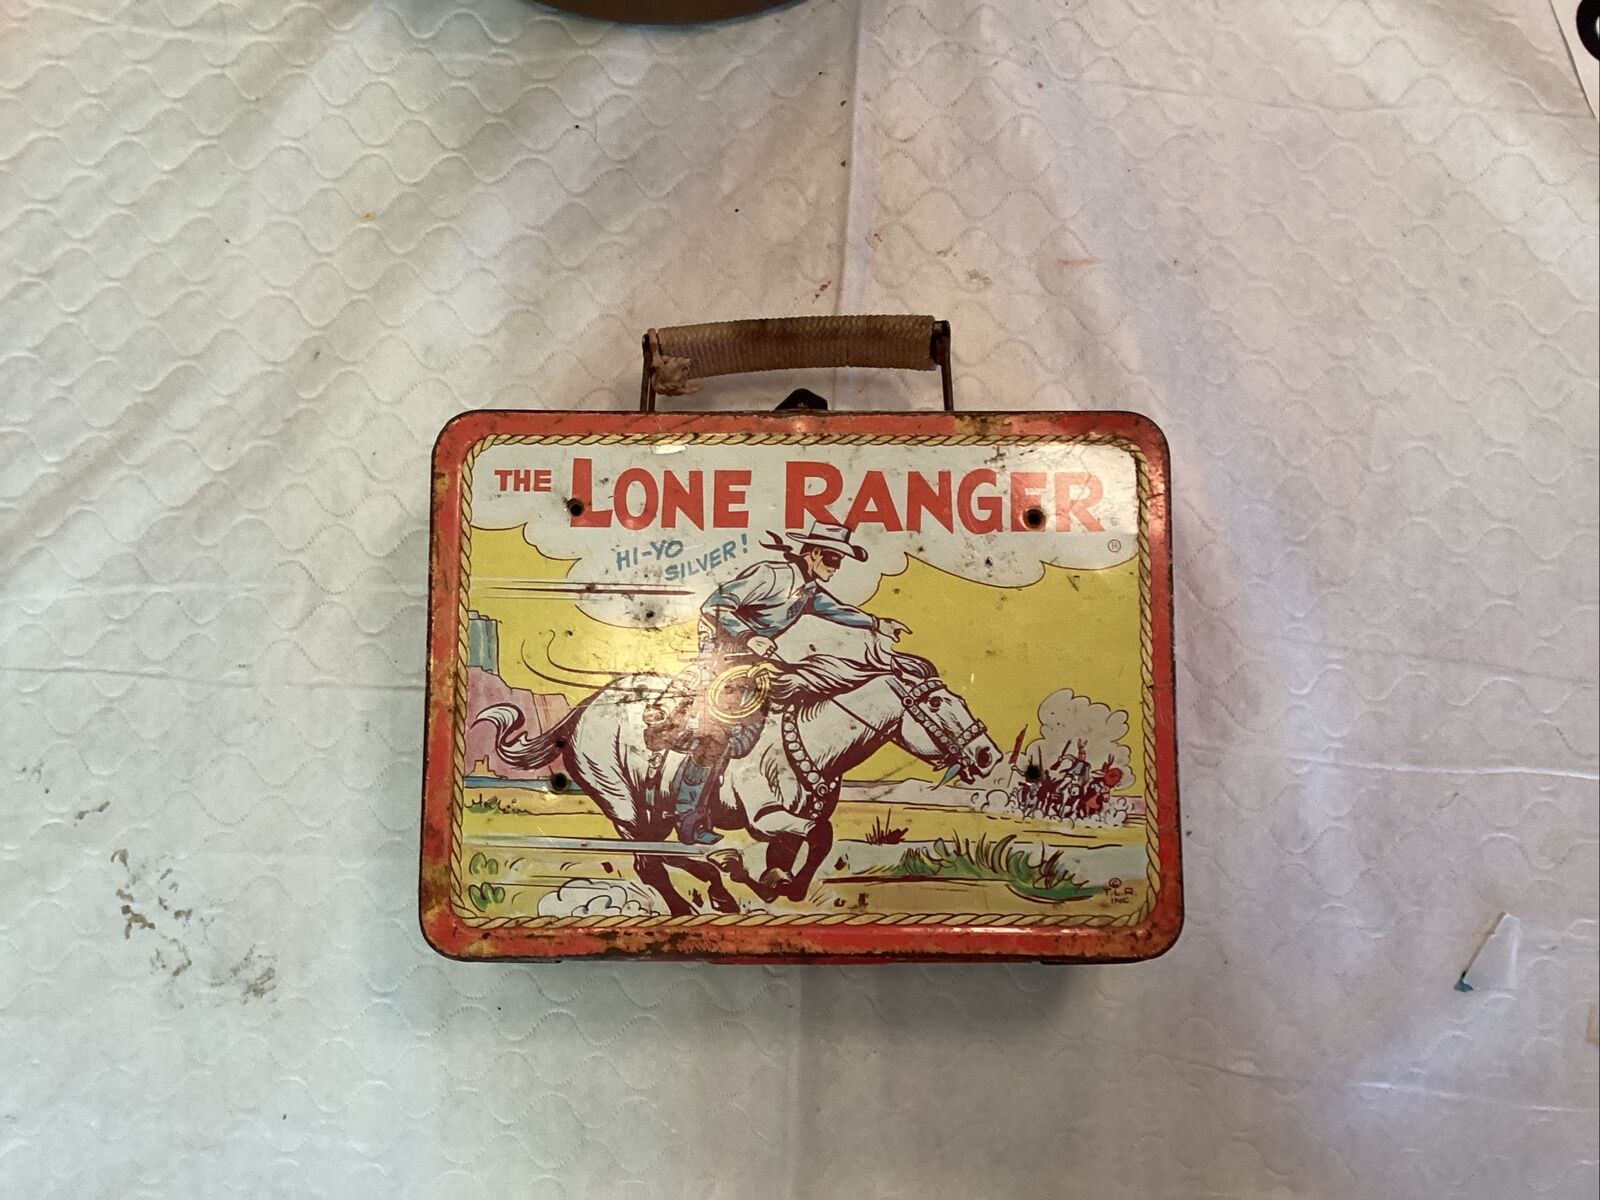 Original 1950’s Lone Ranger Lunch Box (without thermos)